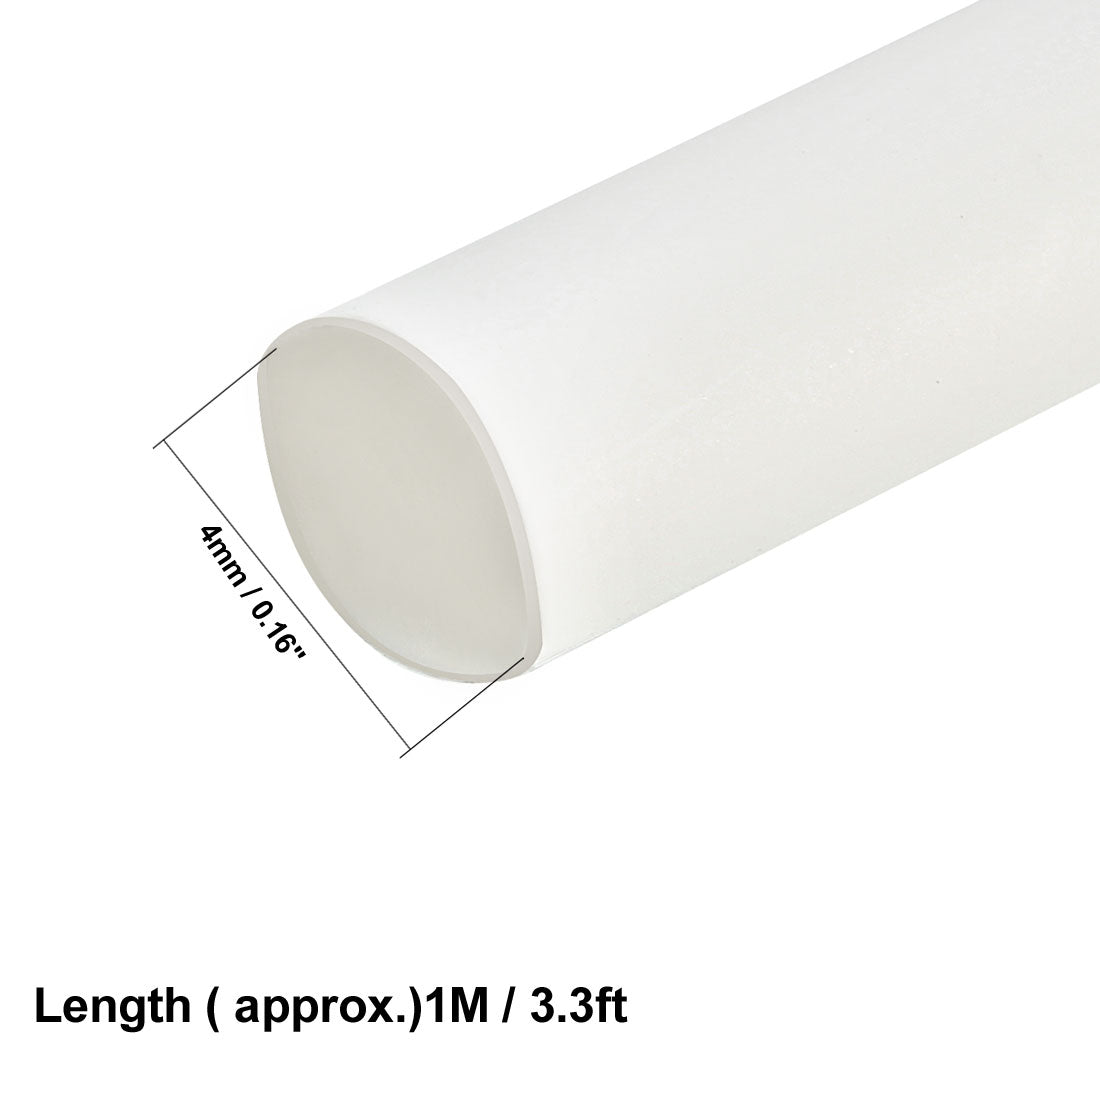 uxcell Uxcell Heat Shrink Tube 2:1 Electrical Insulation Tube Wire Cable Tubing Sleeving Wrap White 4mm Diameter 1m Long